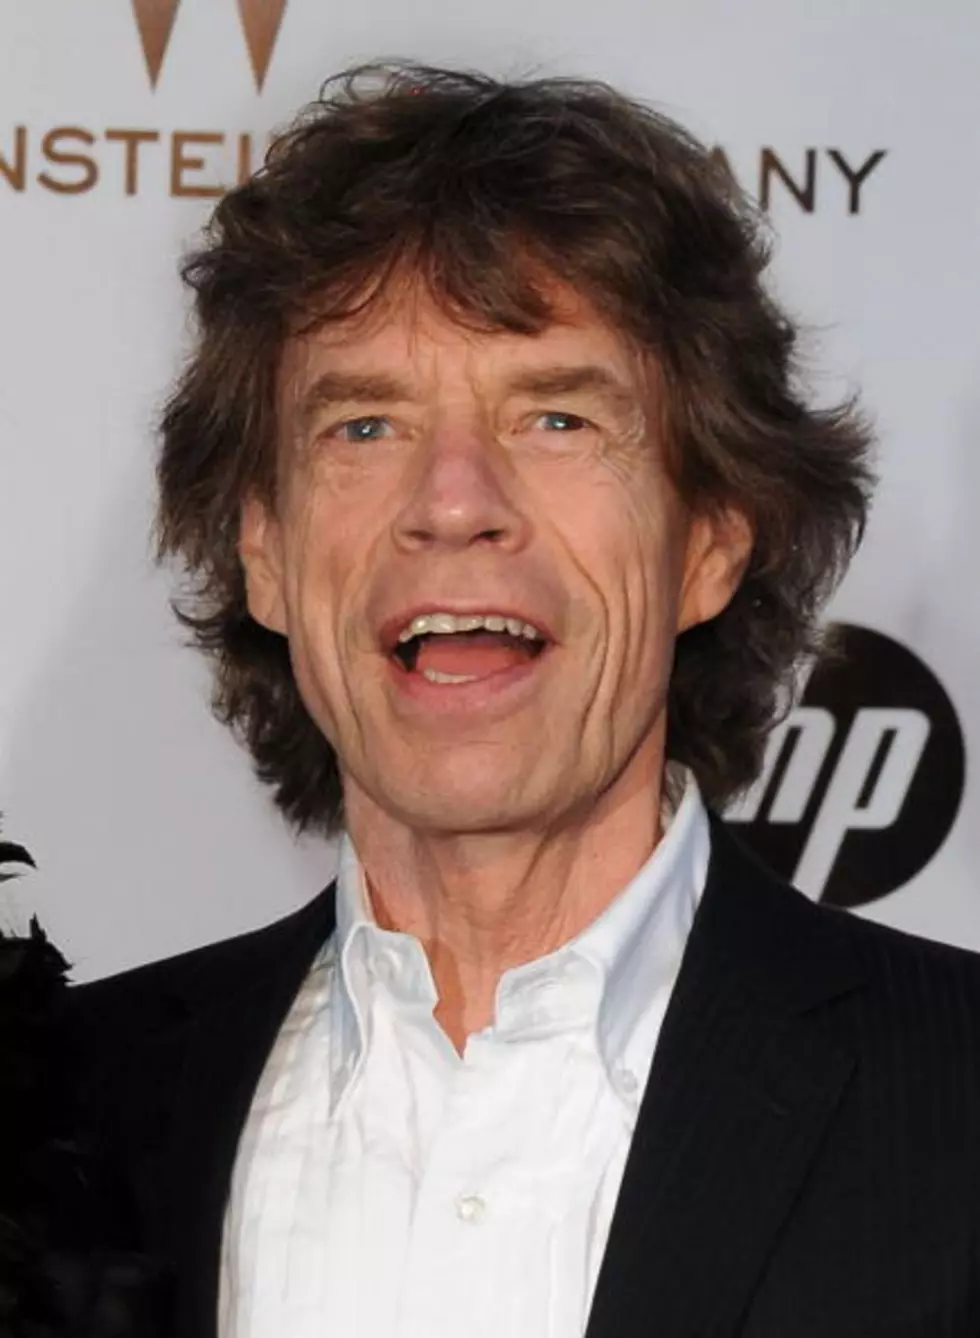 Mick Jagger To Perform on Grammys